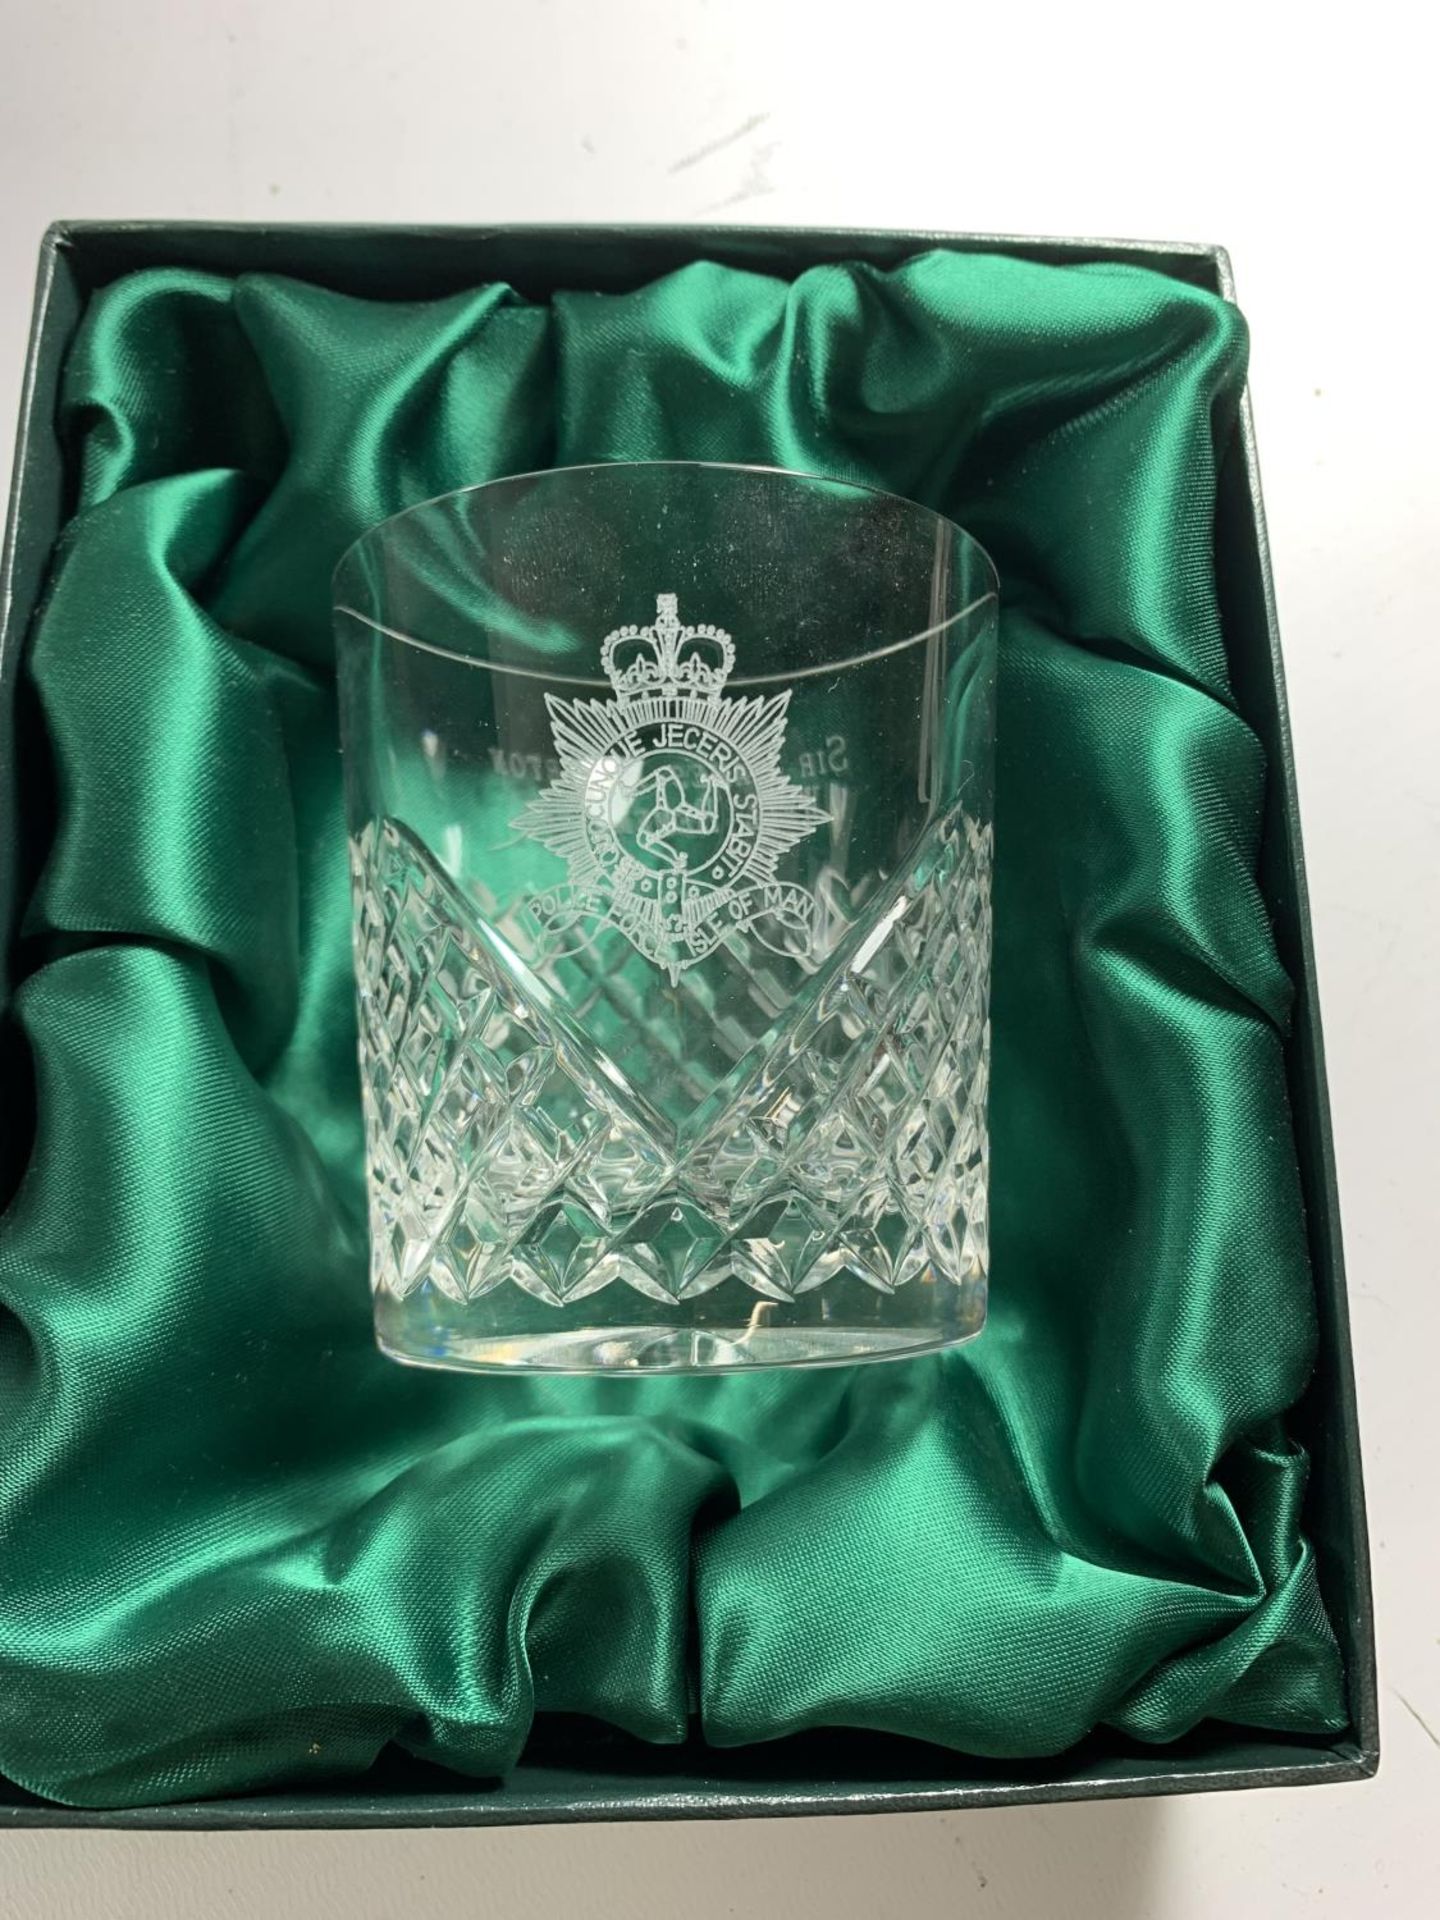 * THREE BOXED ITEMS OF PRESENTATION GLASS, WHISKY GLASS FROM ISLE OF MAN POLICE, DECANTER FROM - Image 7 of 10